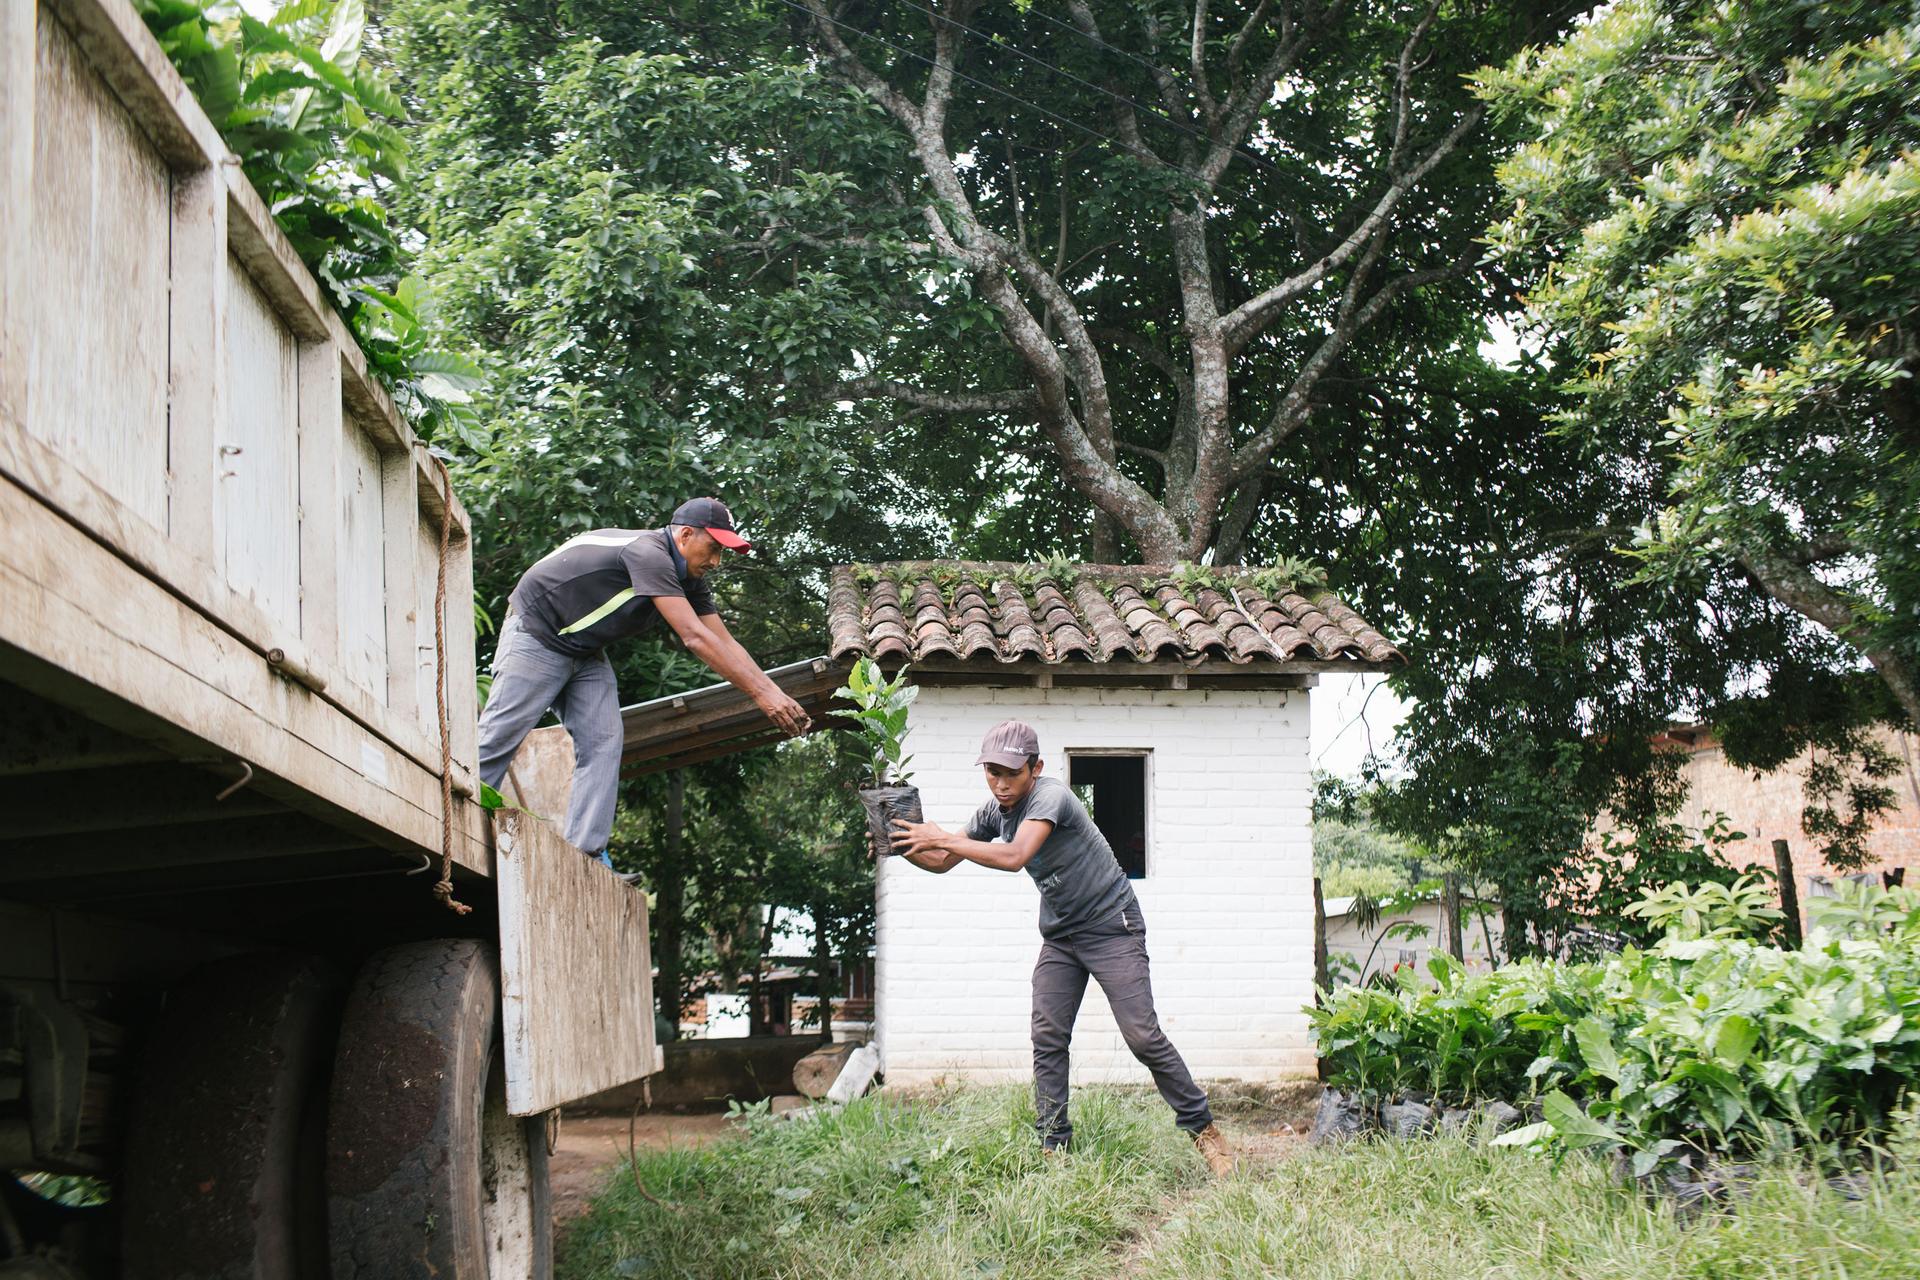 Two coffee workers are shown unloading small plants from the back of a truck.